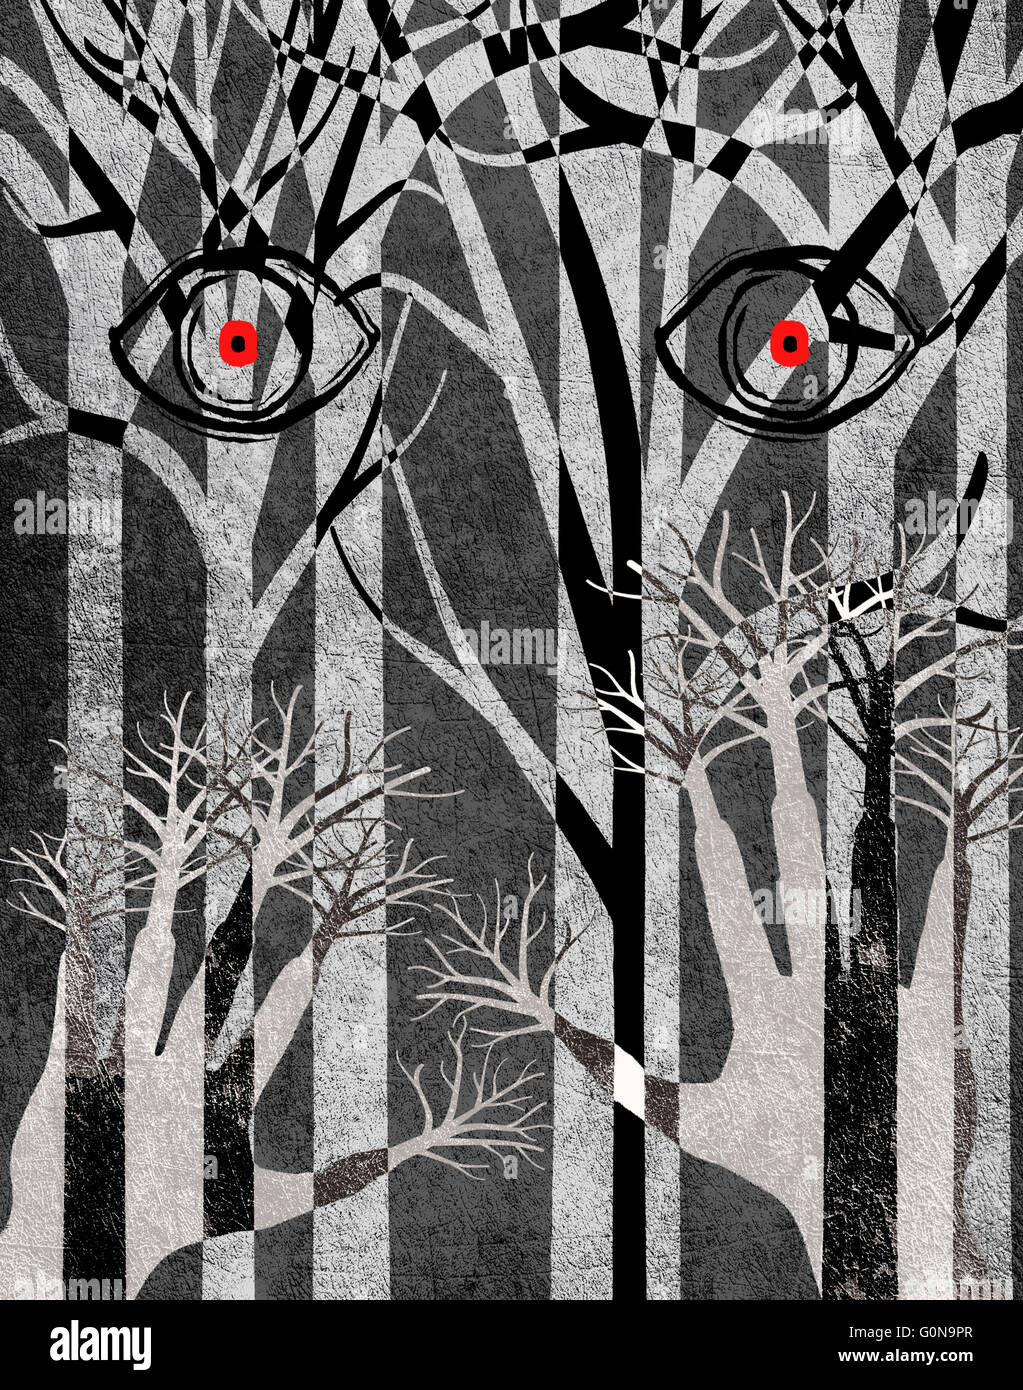 forest with eyes and hands digital illustration Stock Photo